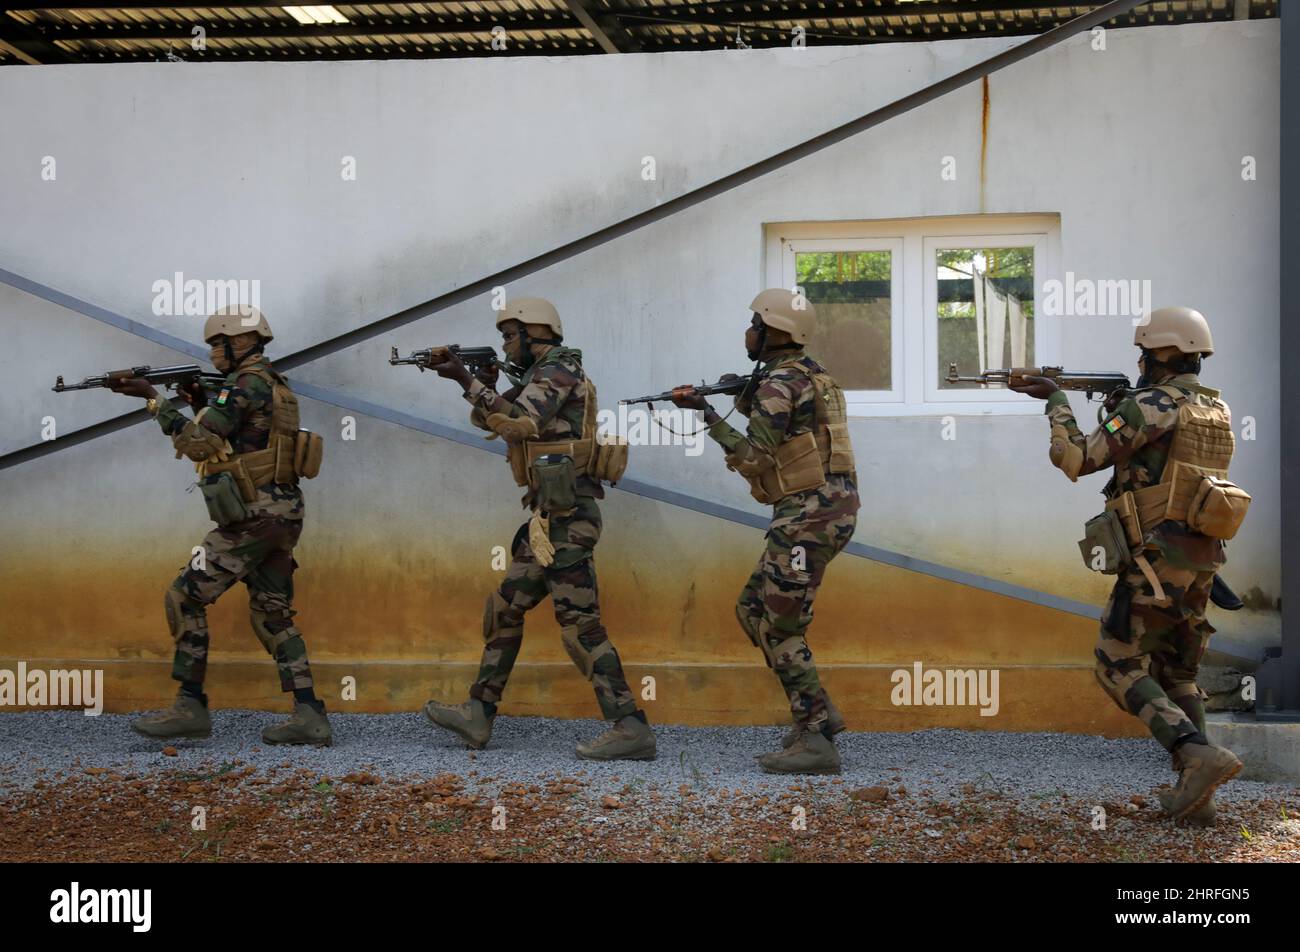 Nigerian Armed Forces soldiers during close quarter battle training alongside French Special Forces during exercise Flintlock 2022 February 19, 2022 near Abidjan, Ivory Coast. Stock Photo